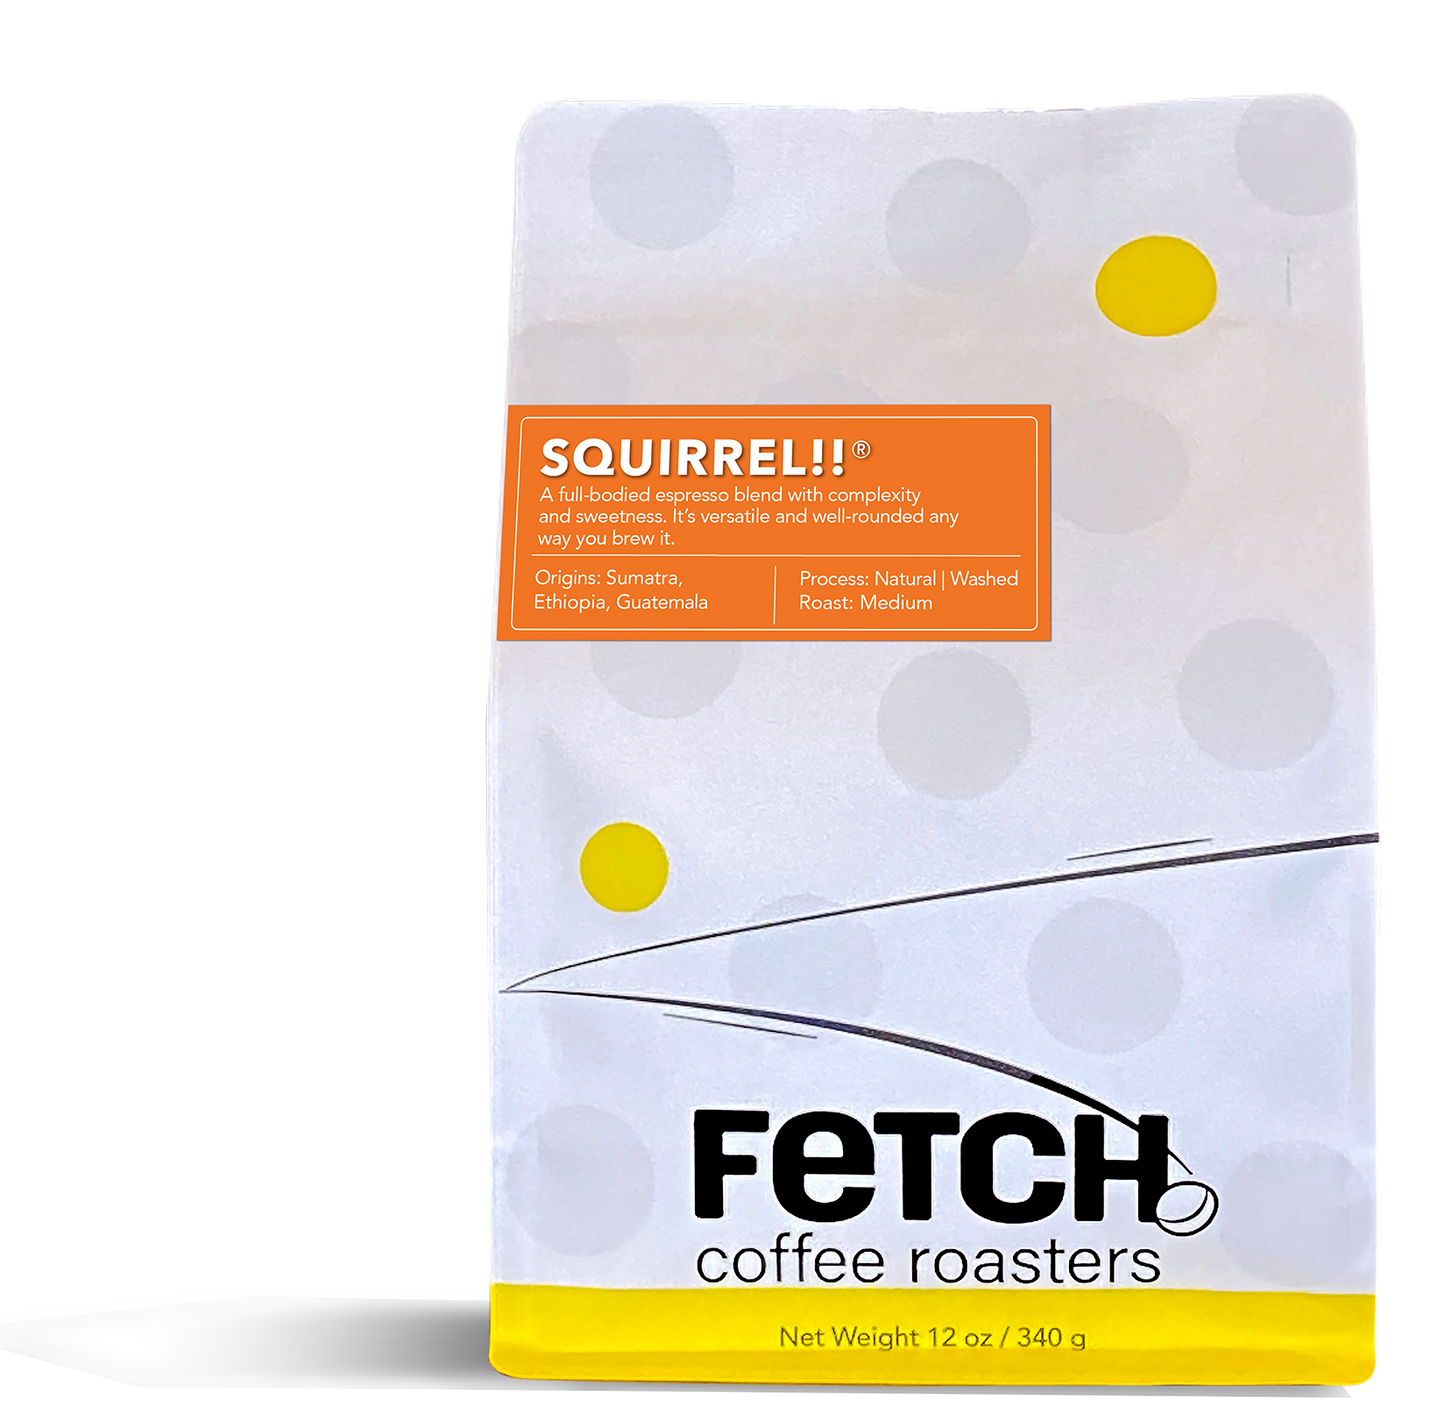 Squirrel!! has an orange label offset to the left and toward the top of the white recloseable top of the coffee bag. The bottom of the bag has a yellow band, and the logo shows a bean sitting at the base of the 'h' in Fetch.